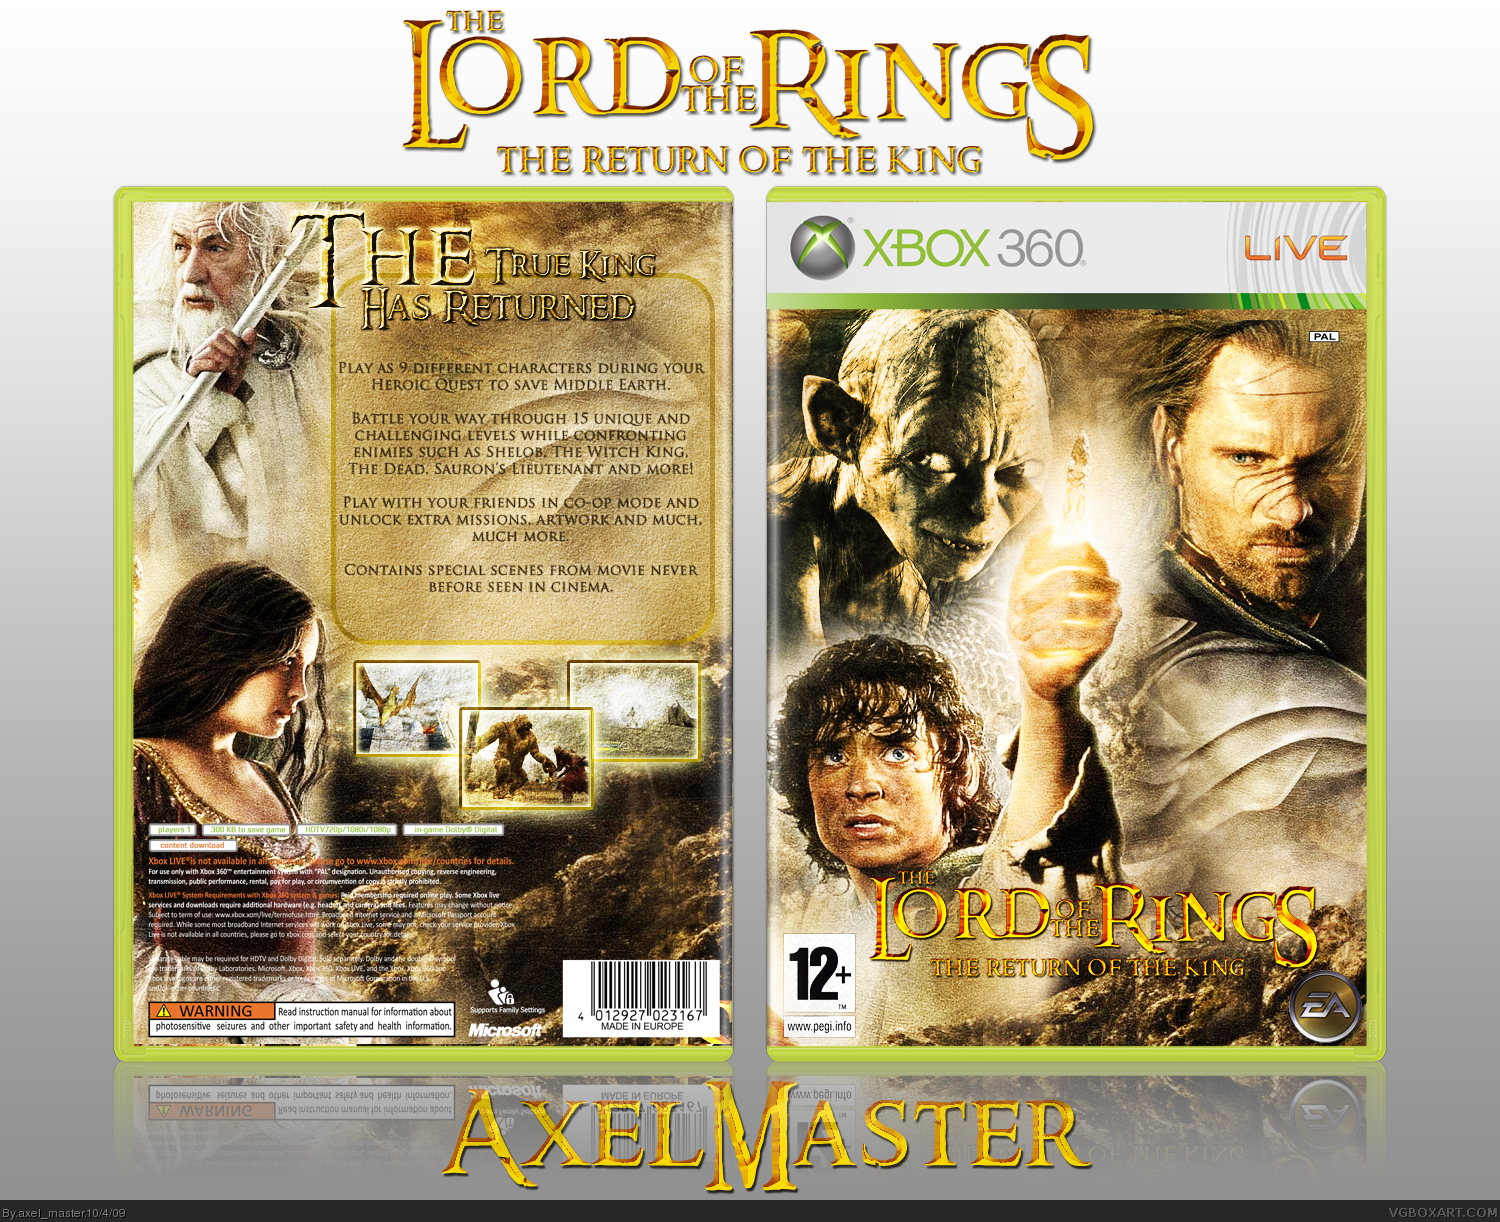 The Lord of The Rings: The Return of The King box cover